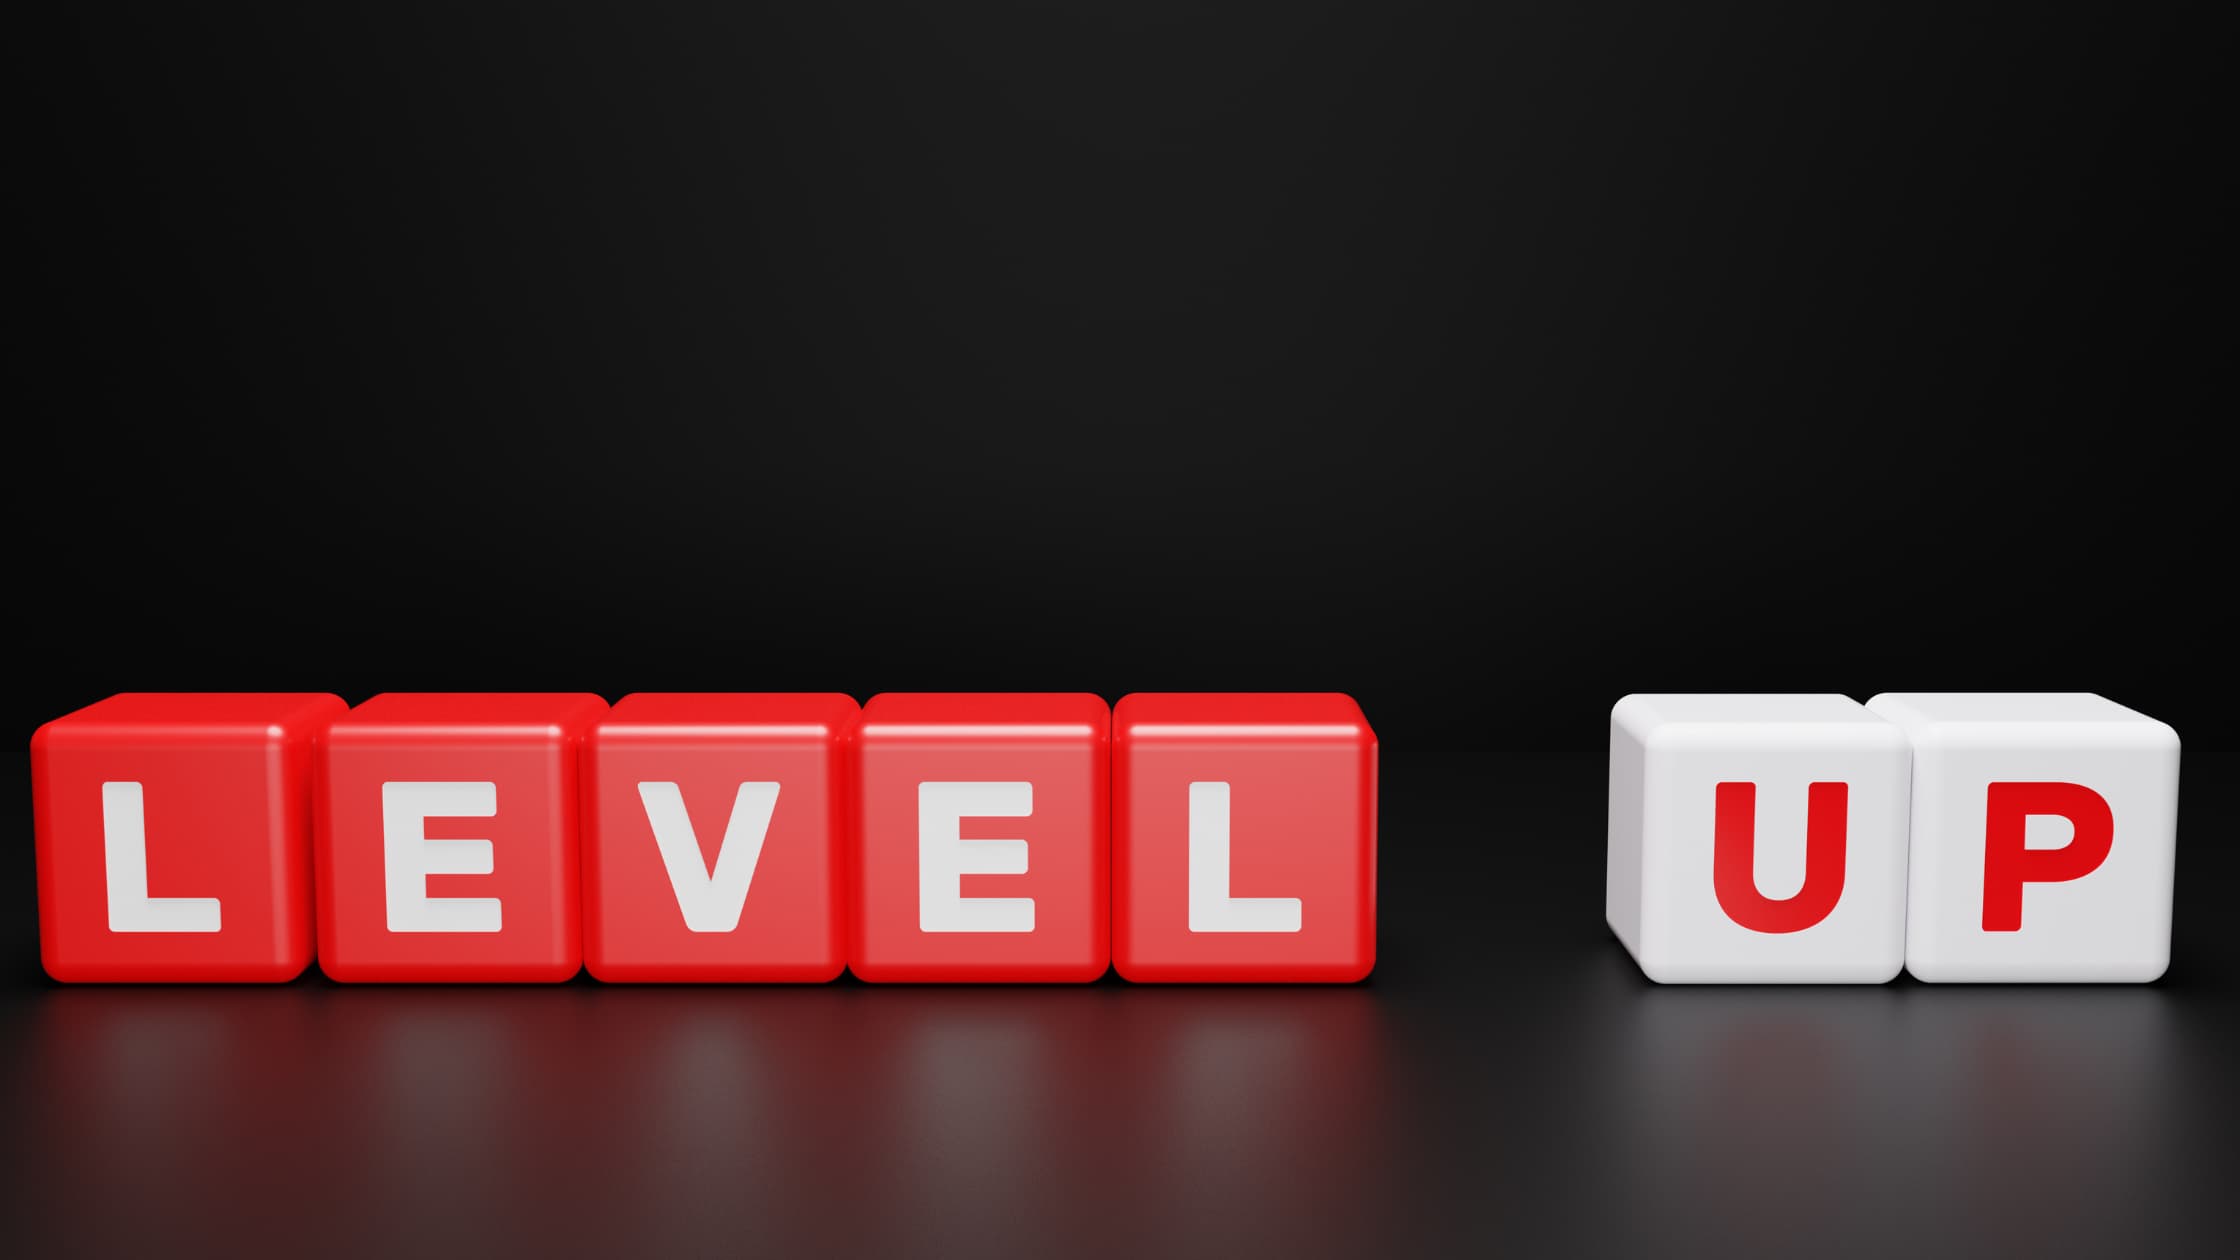 Red and white cubes with "level up" text on a black background.